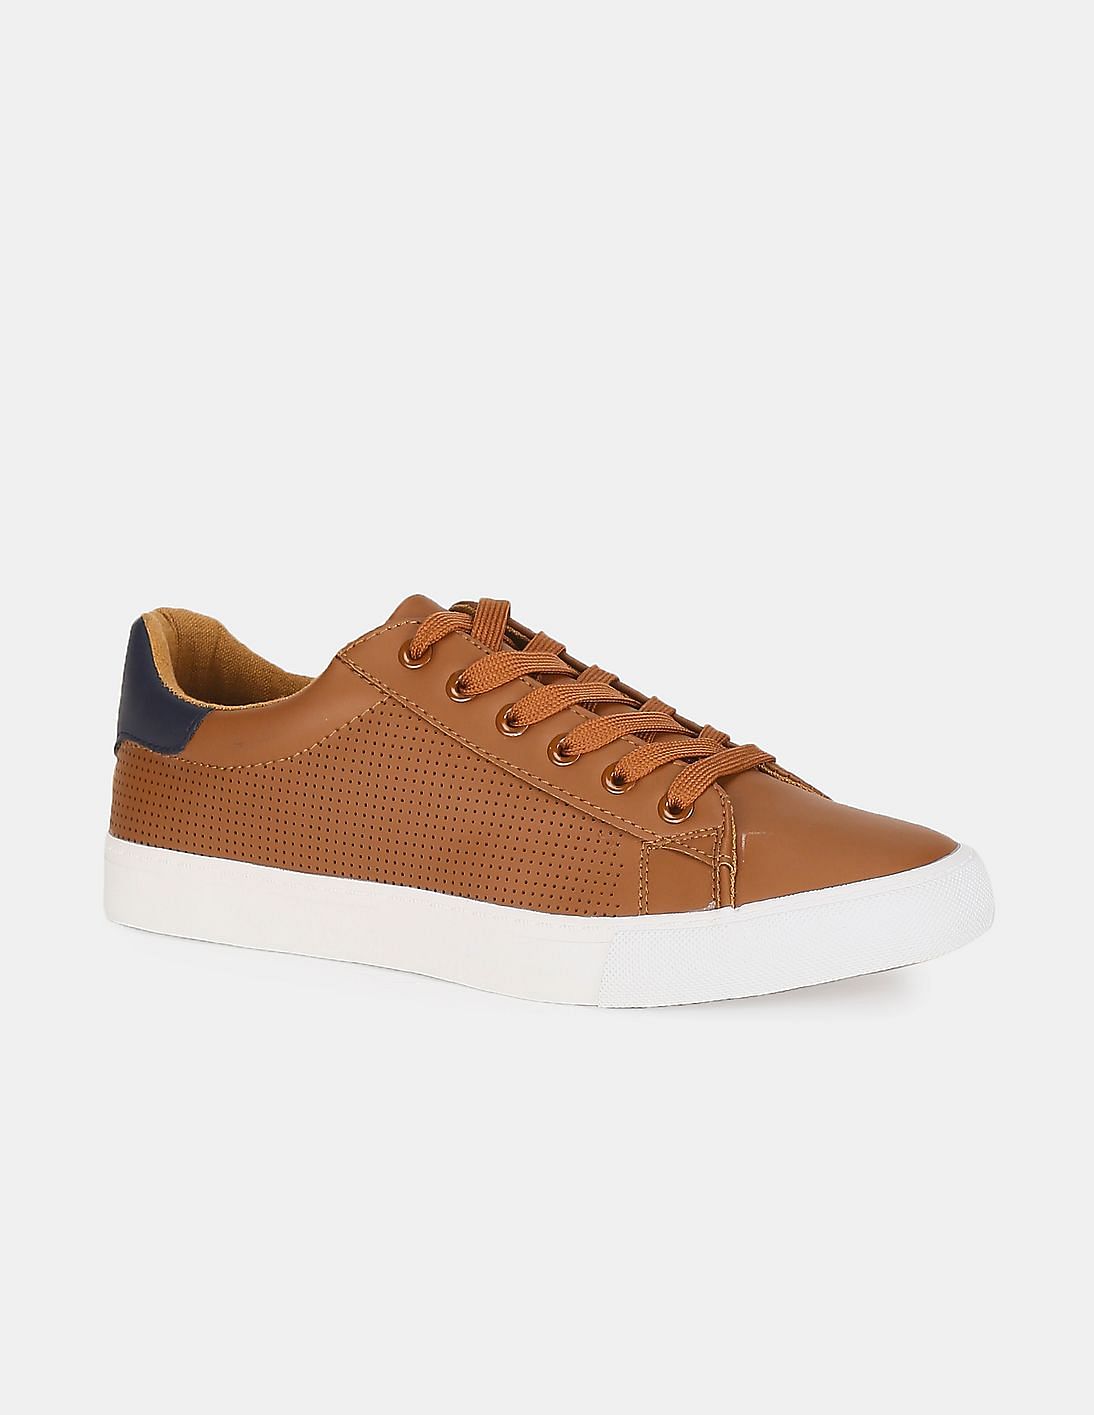 Buy U.S. Polo Assn. Lace Up Perforated Ricky Sneakers - NNNOW.com